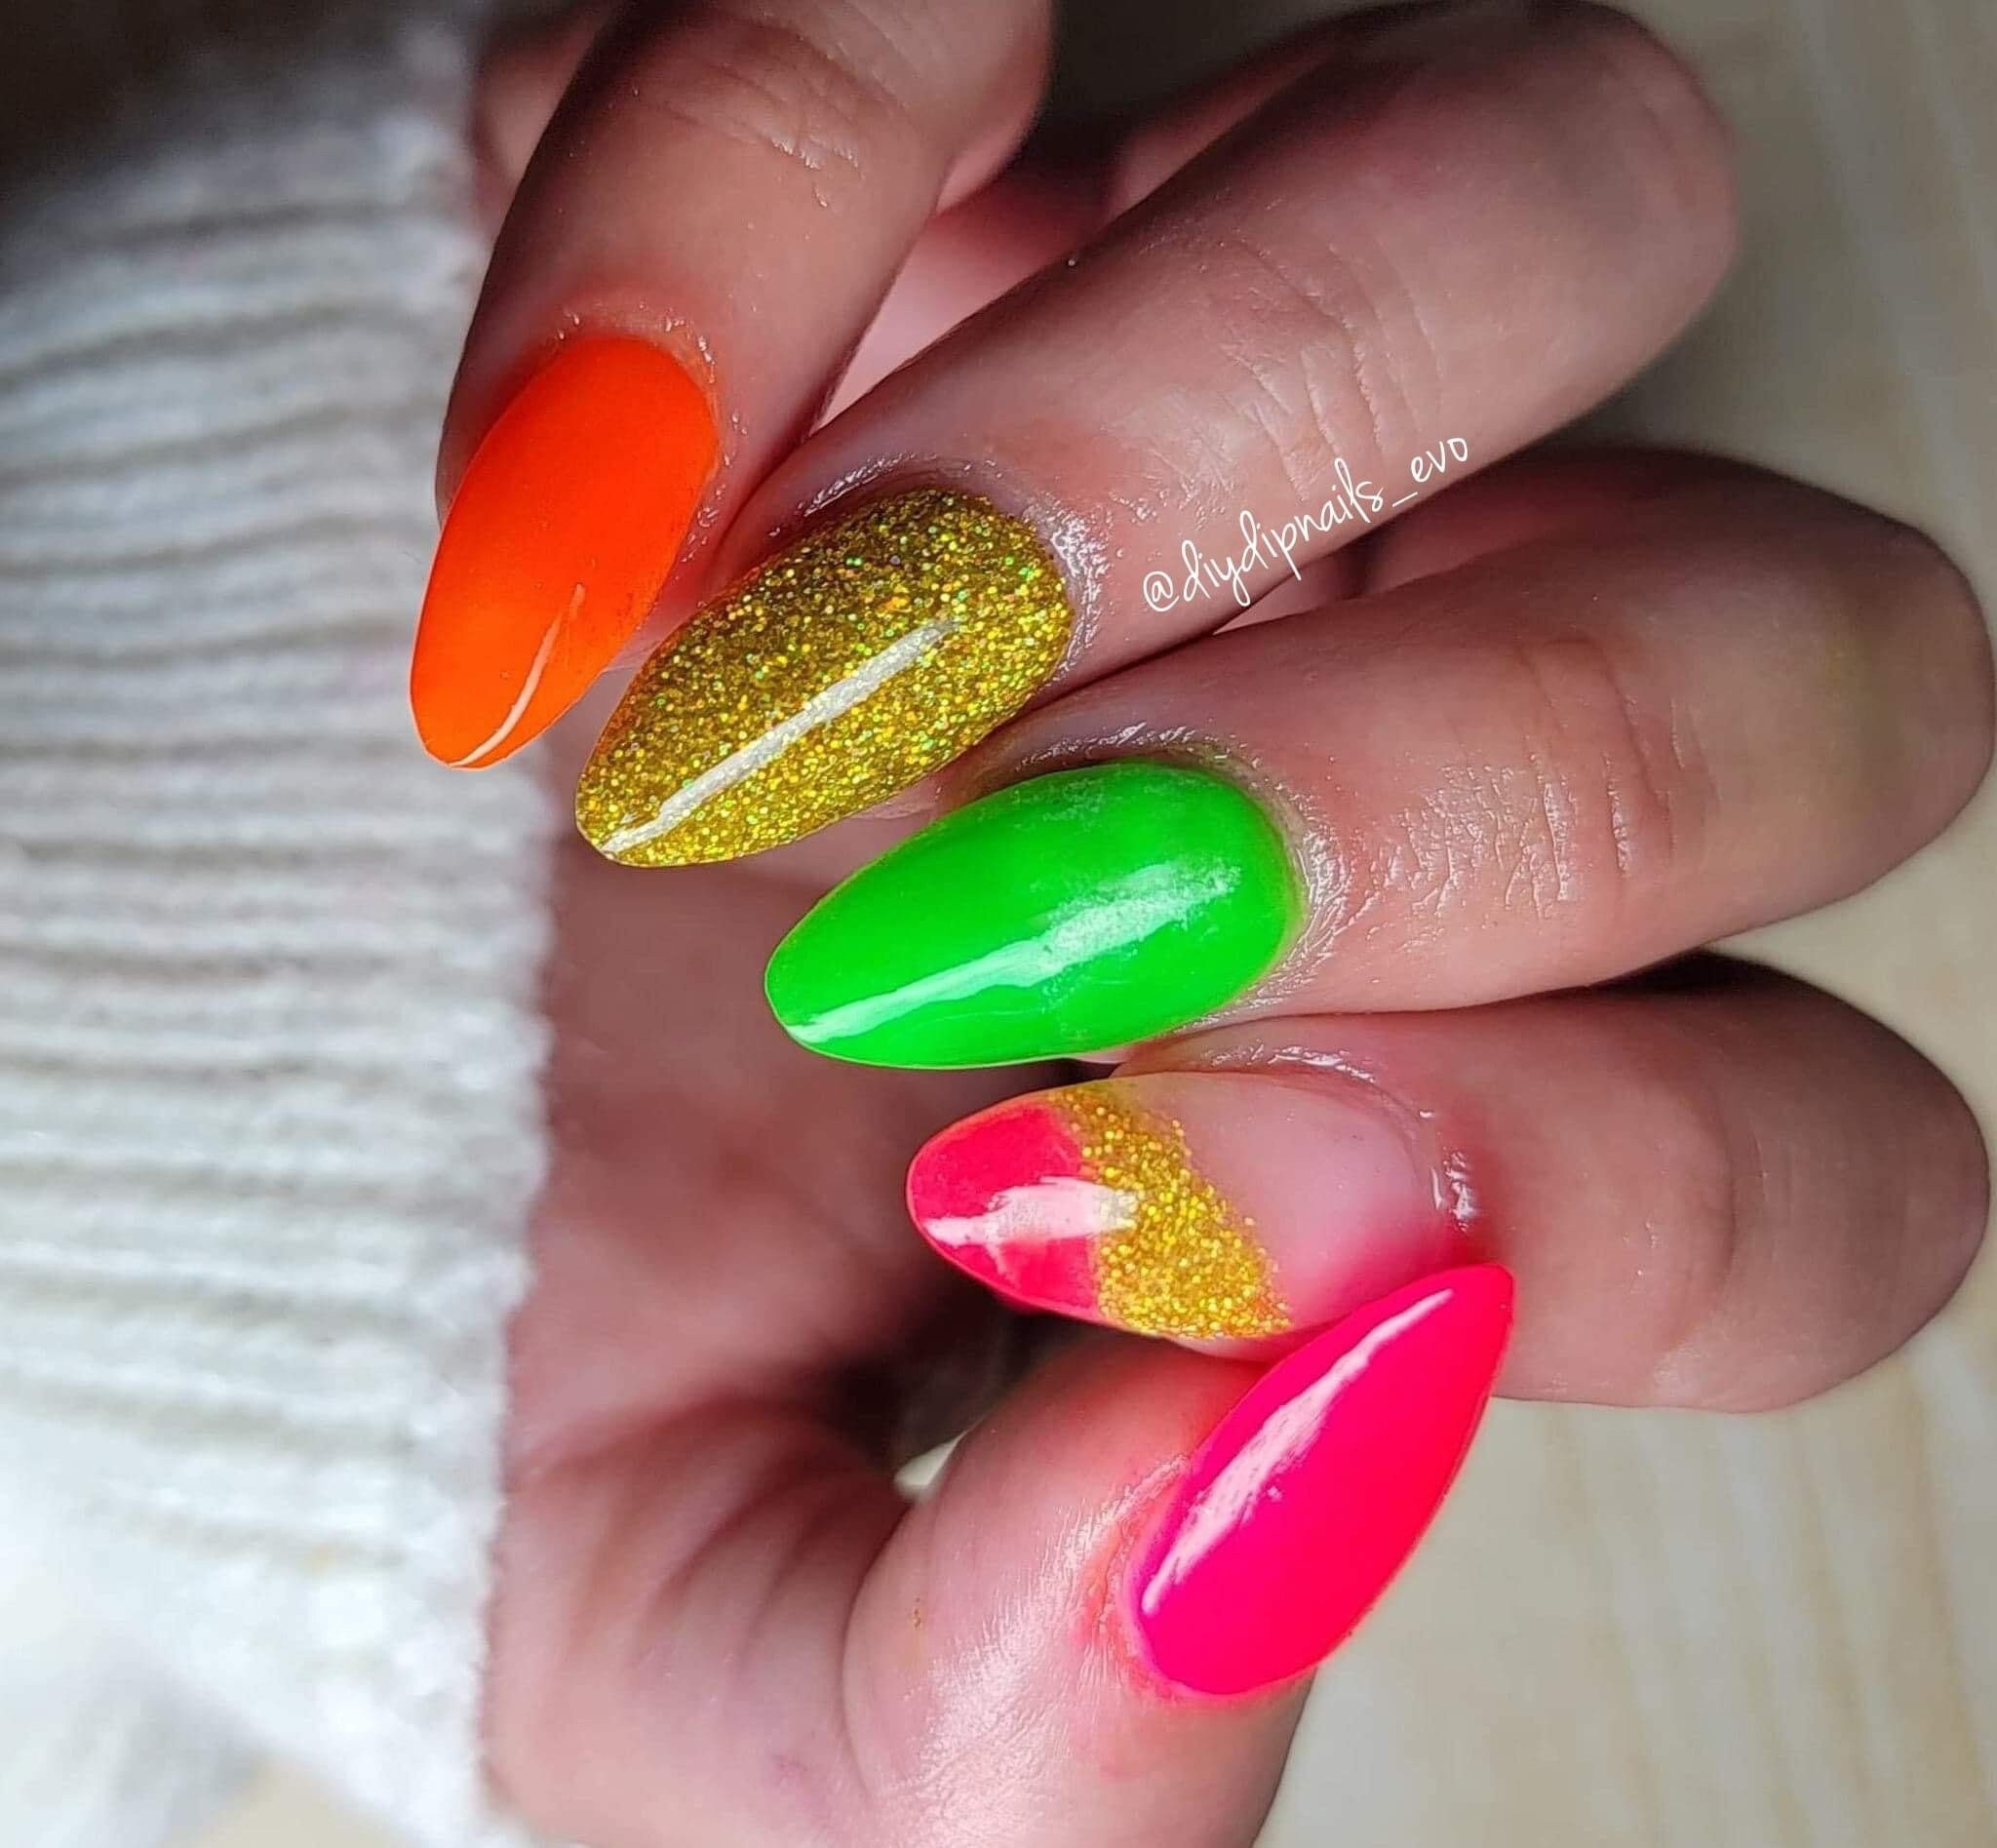 Suns Out Buns Out glow Dip Powder Neon Collection - Etsy